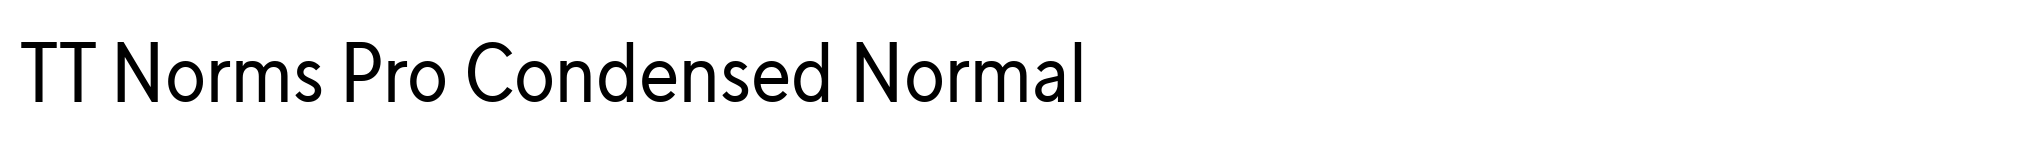 TT Norms Pro Condensed Normal image